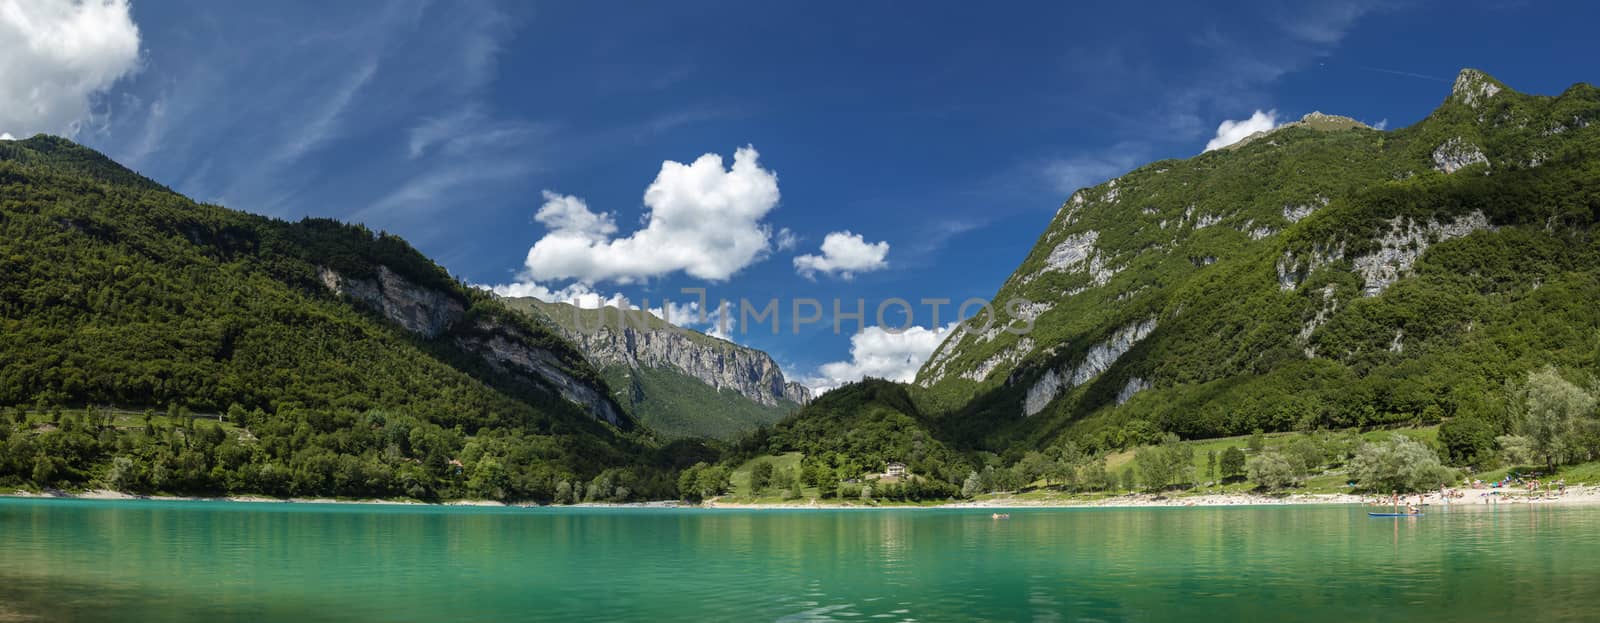 Tenno, Italy, Europe, August 2019, view of Lake Tenno